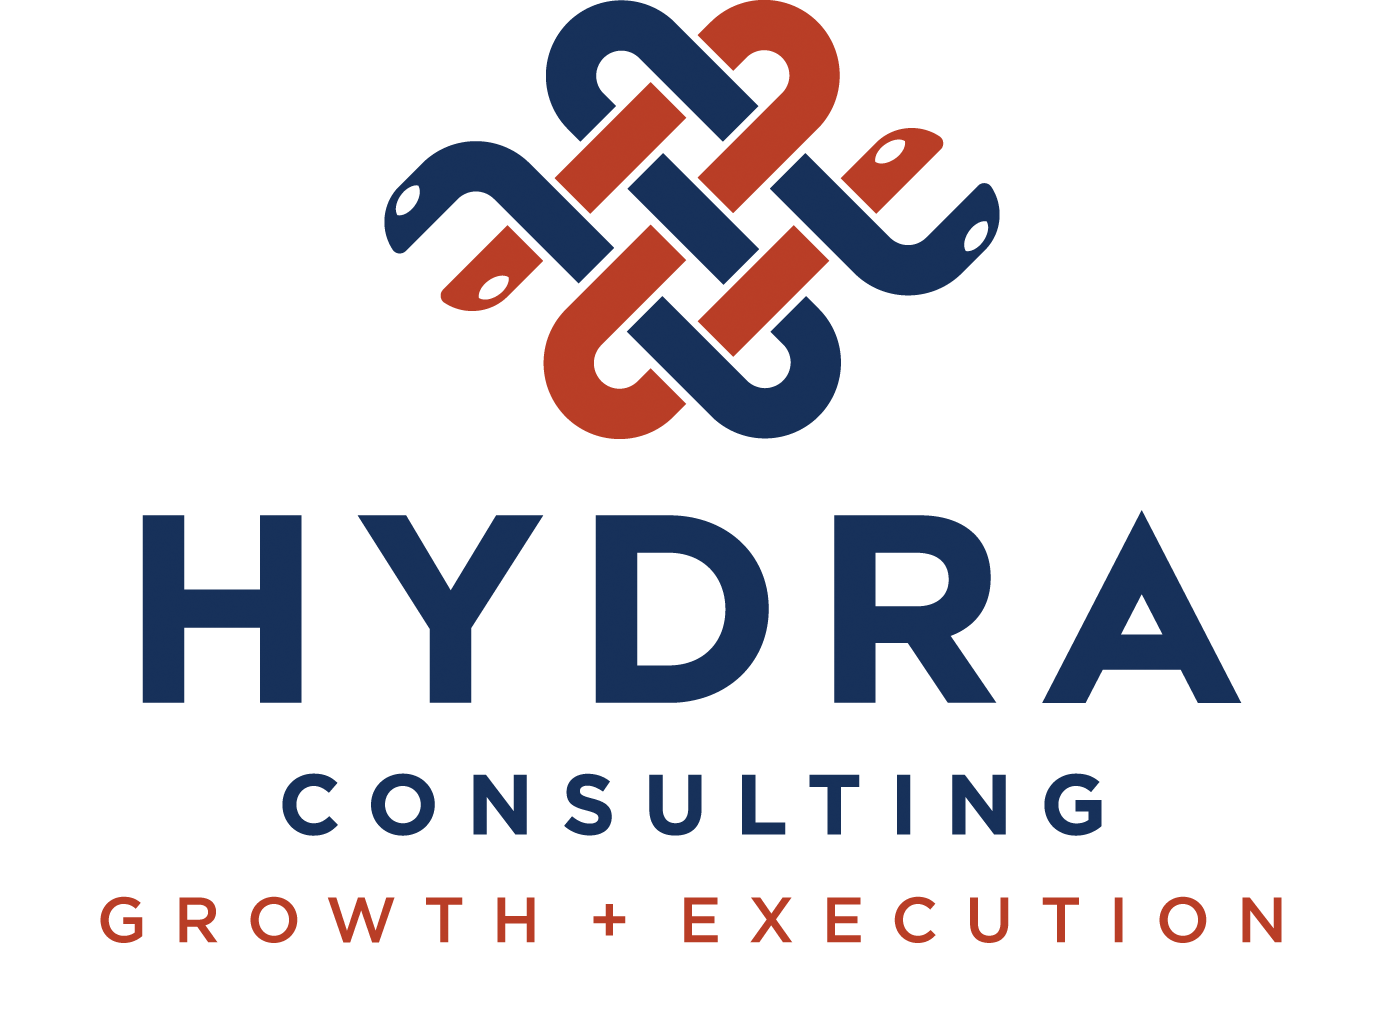 Hydra Consulting